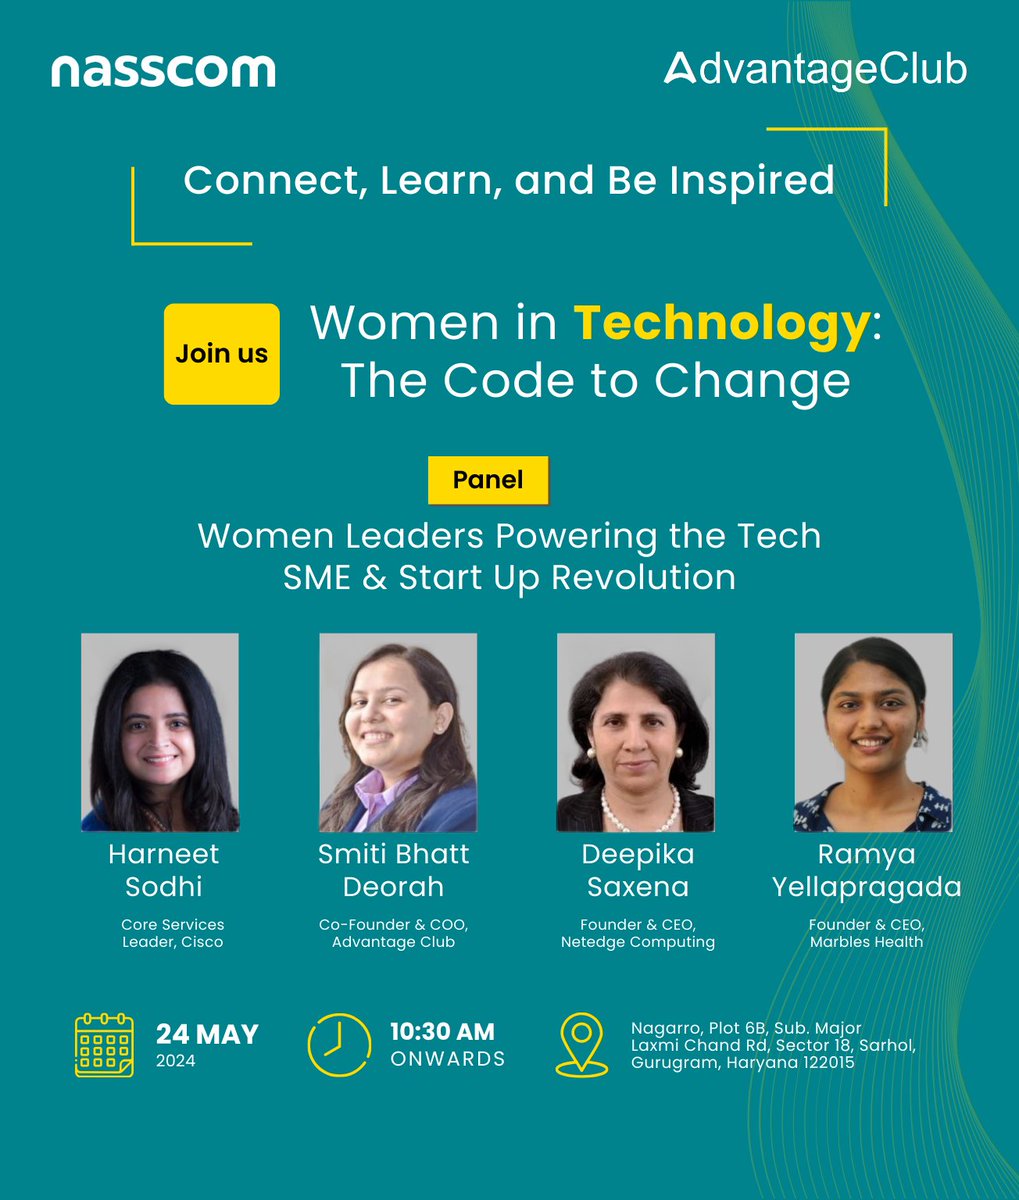 We're excited to share that our Co-Founder & COO, Smiti Bhatt Deorah, will be a featured speaker at Nasscom's panel discussion on 'Women Leaders Powering Tech SME & Startup Revolution.' 📅 Date: May 24, 2024 🕥 Time: 10:30 AM onwards #WomenInTech #TechLeadership #NasscomEvents